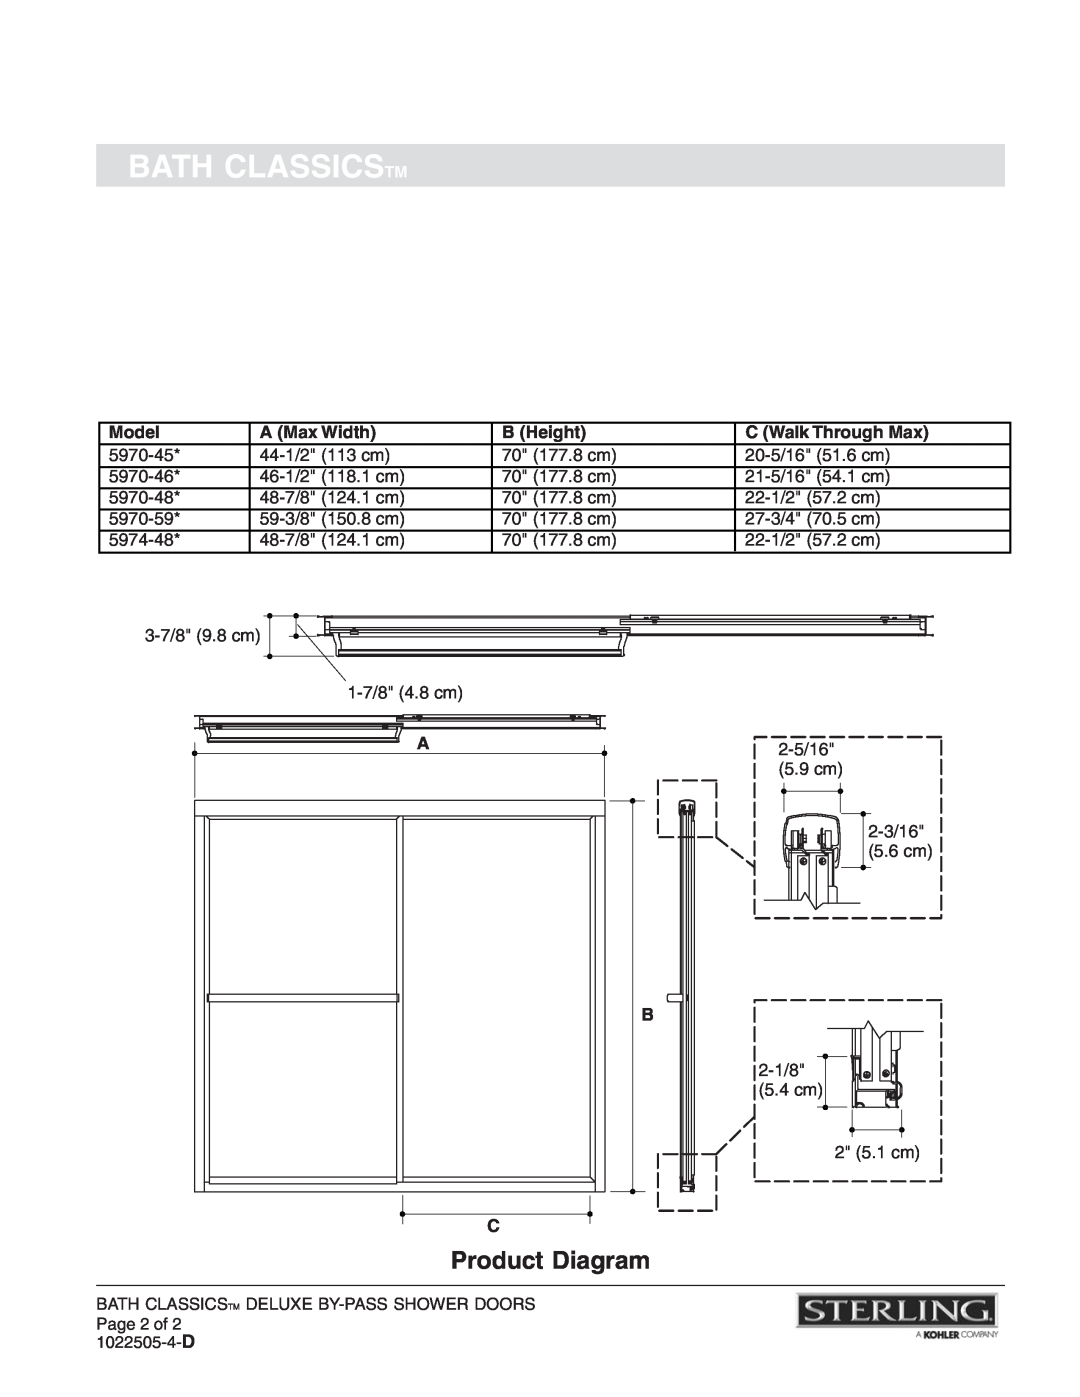 Sterling Plumbing 5970 Product Diagram, Bath Classicstm, Model, A Max Width, B Height, C Walk Through Max 